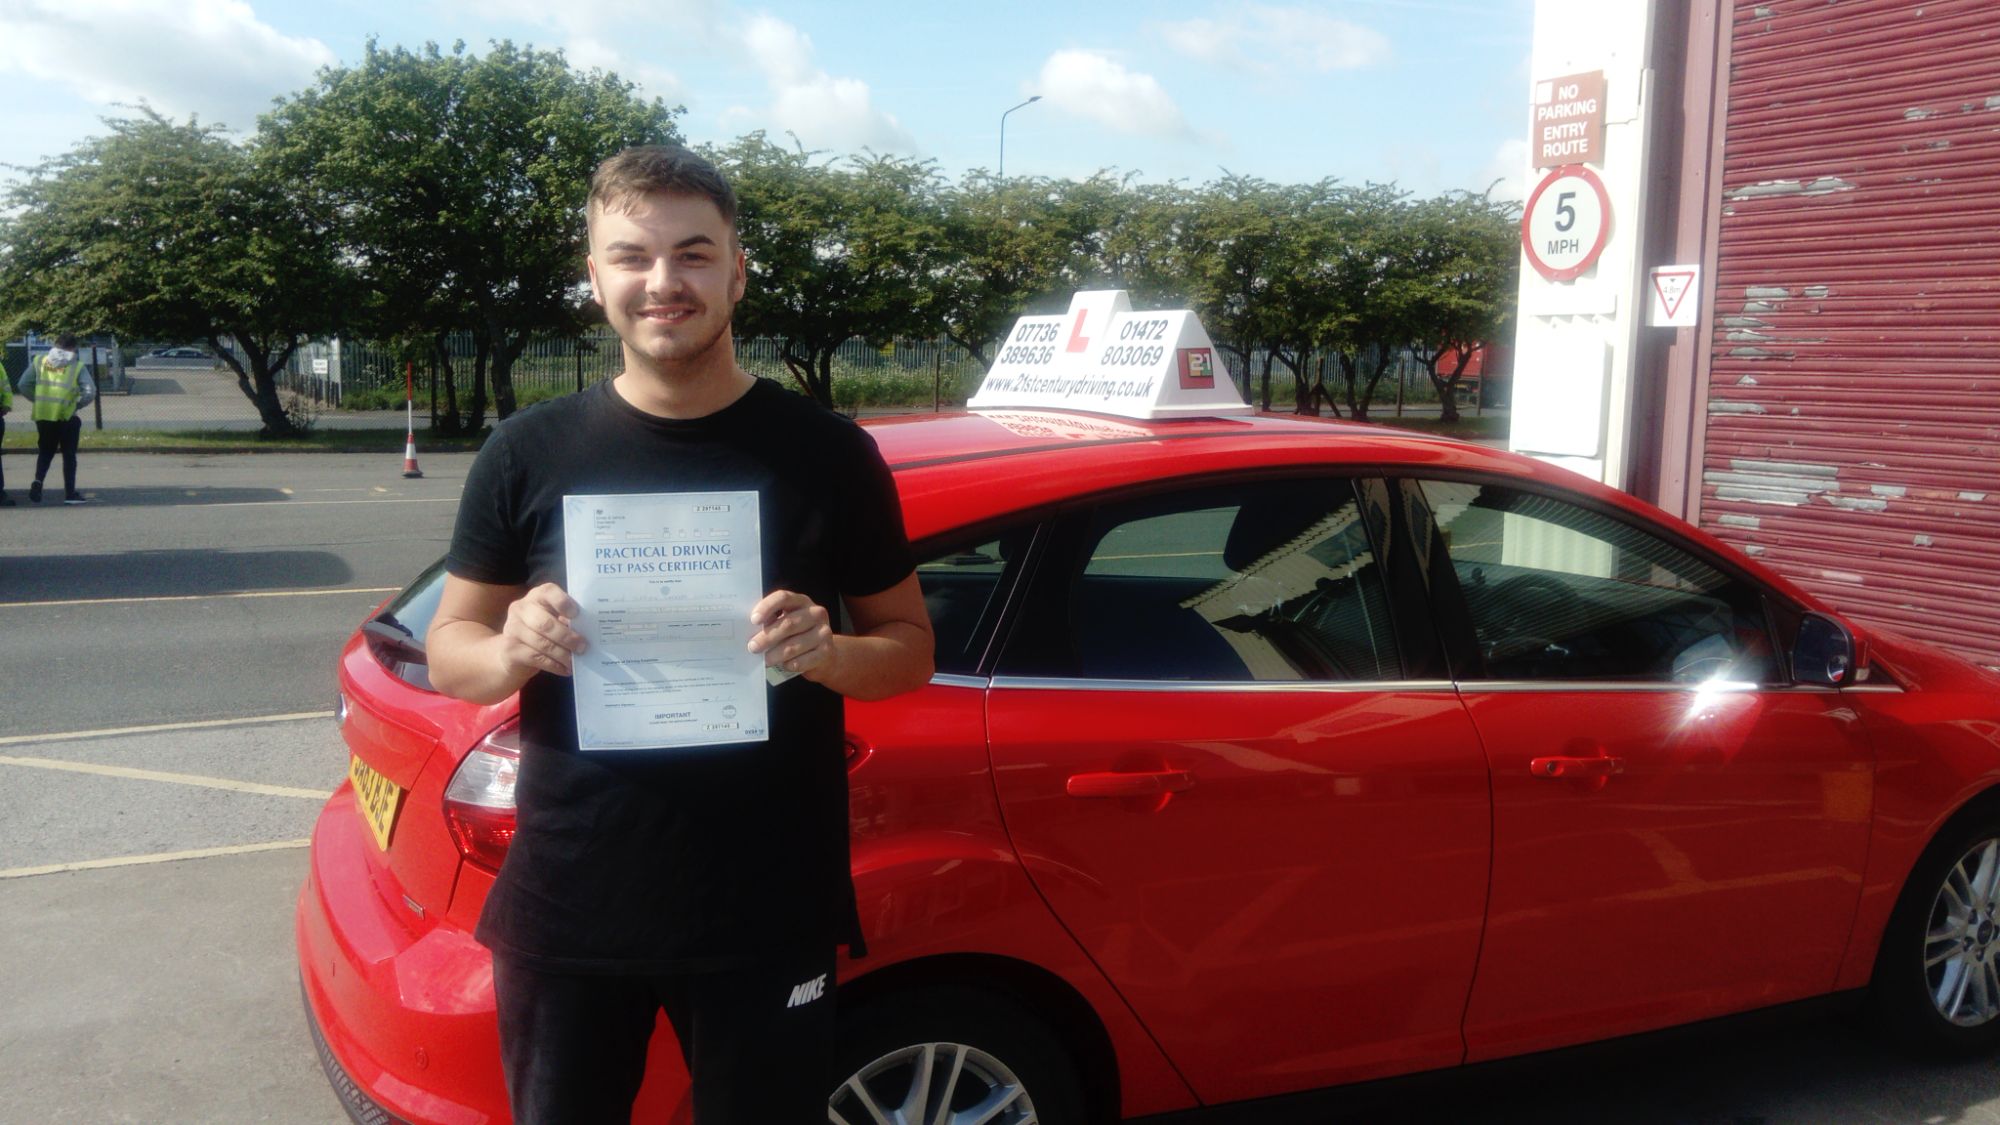 Driving Test Success, I took my driving lessons in grimsby with 21st Century Driving